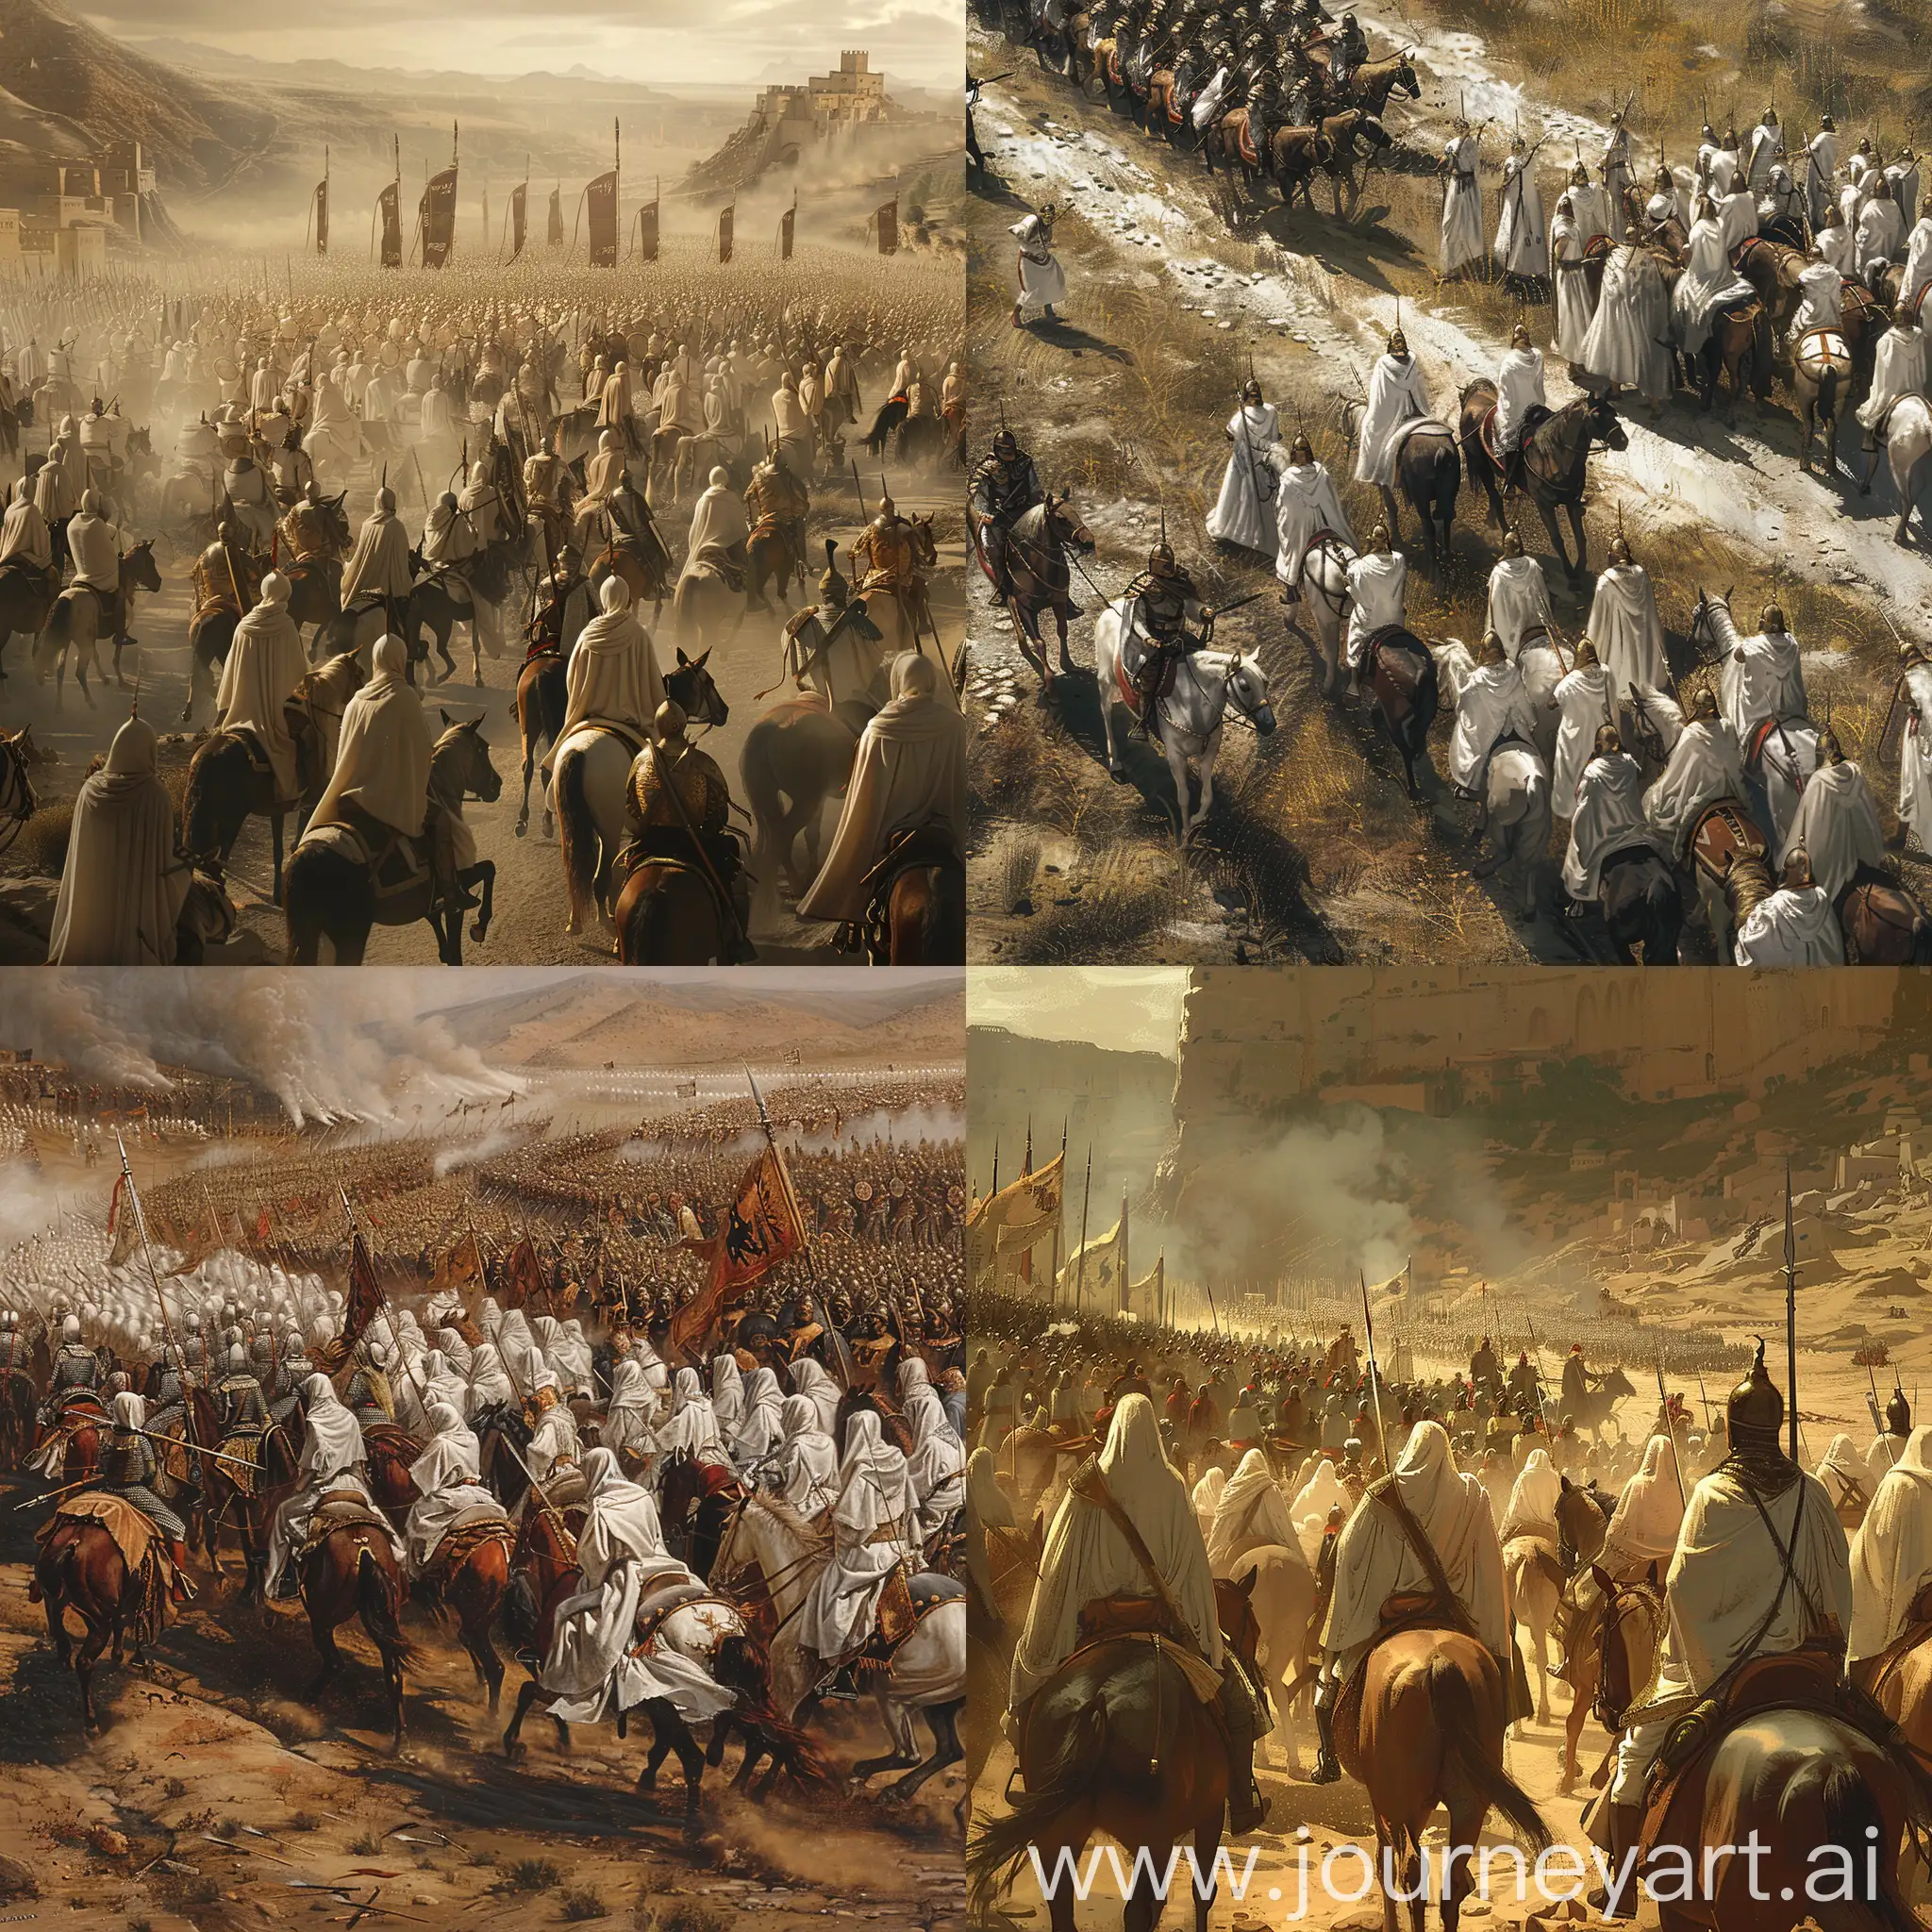 Epic-Battle-of-WhiteRobed-Armies-with-Cavalry-and-Thousands-of-Troops-and-Horses